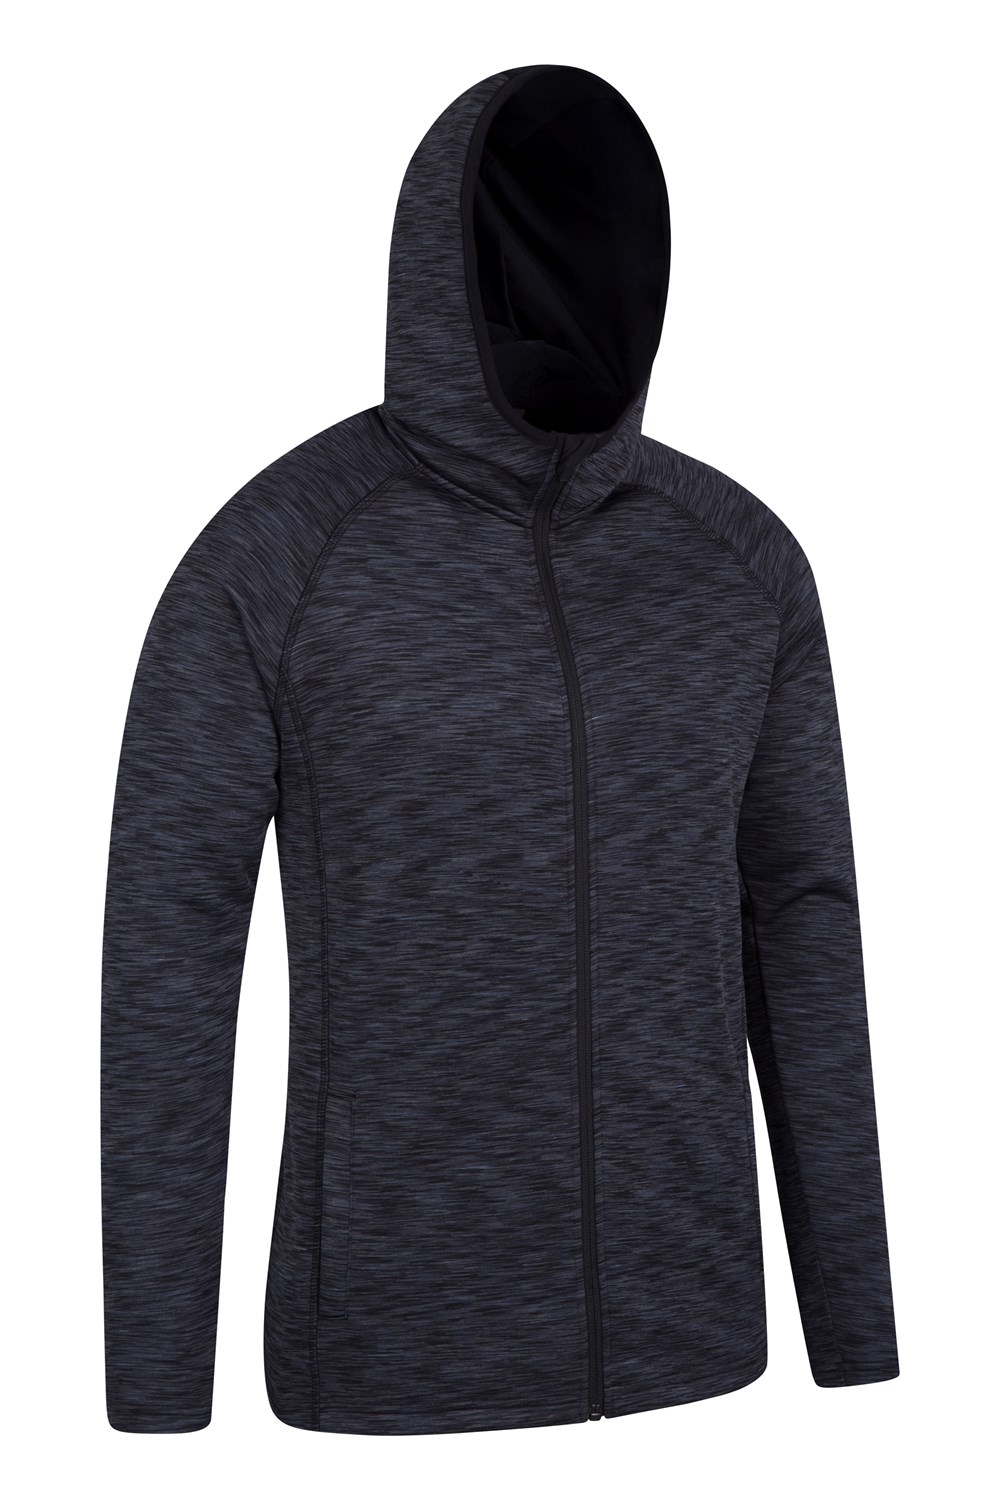 Mountain Warehouse Power Fleece Lined Hoodie w// Stretch Mesh and Sweat Wicking